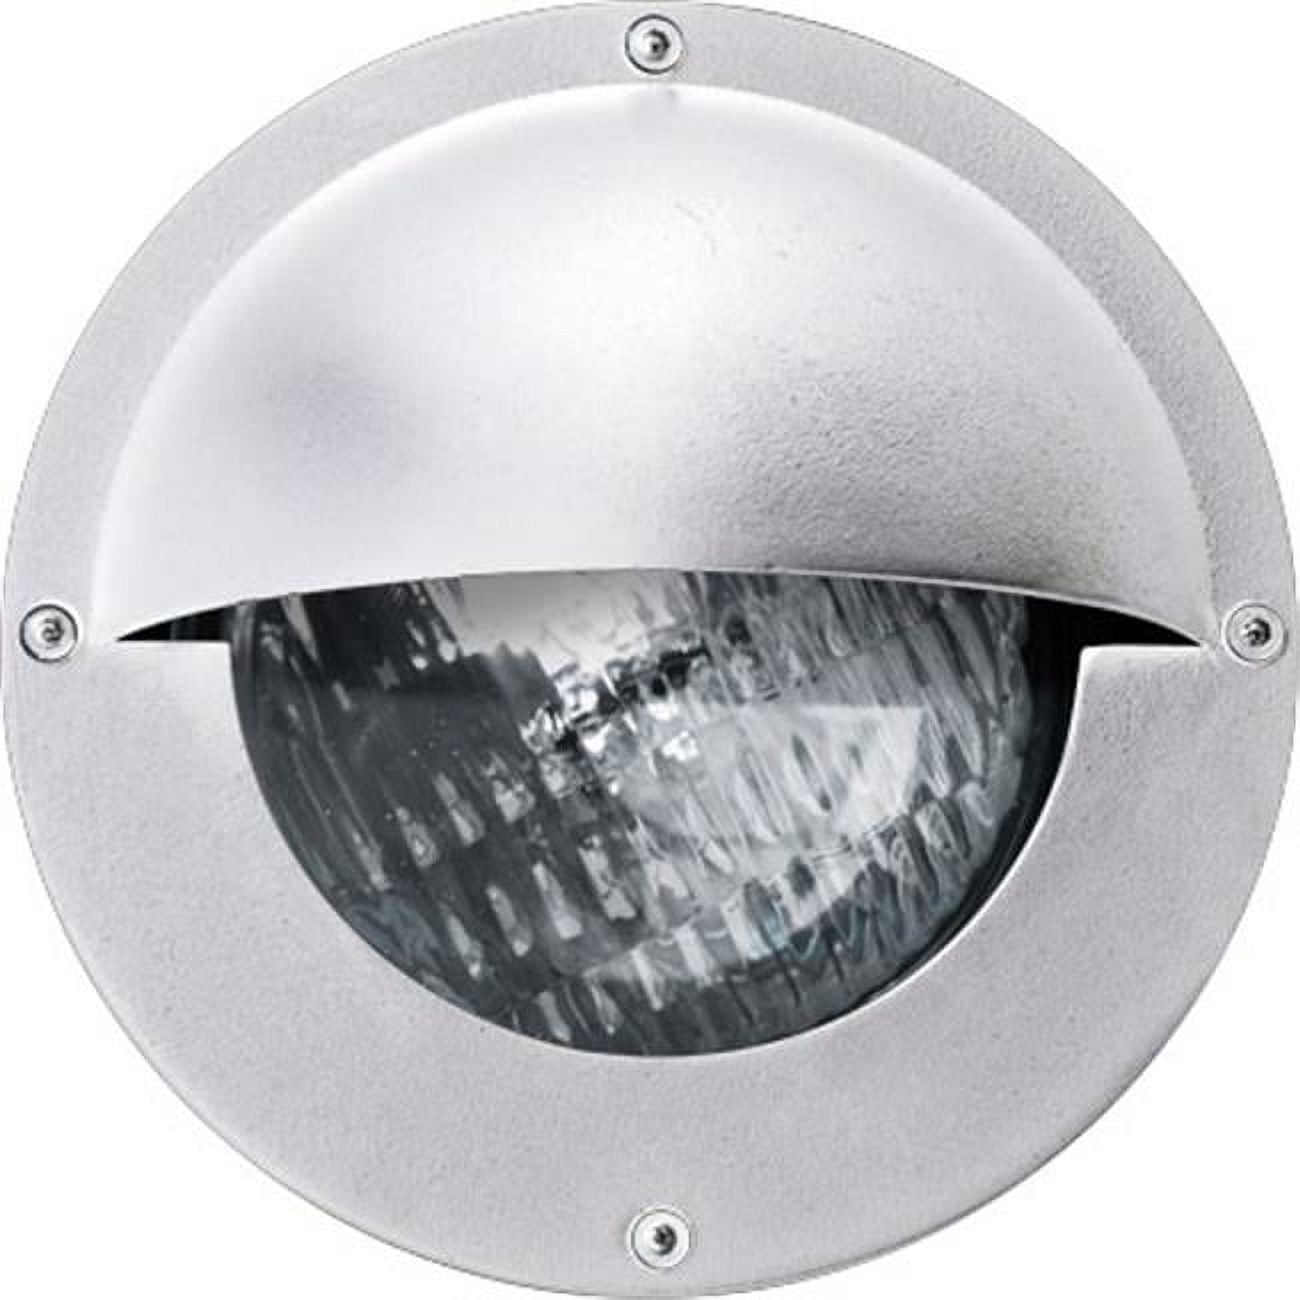 Picture of Dabmar Lighting LV609-W Cast Aluminum Recessed Brick, Step & Wall Light with Eyelid, White - 6.06 x 6.06 x 6.25 in.